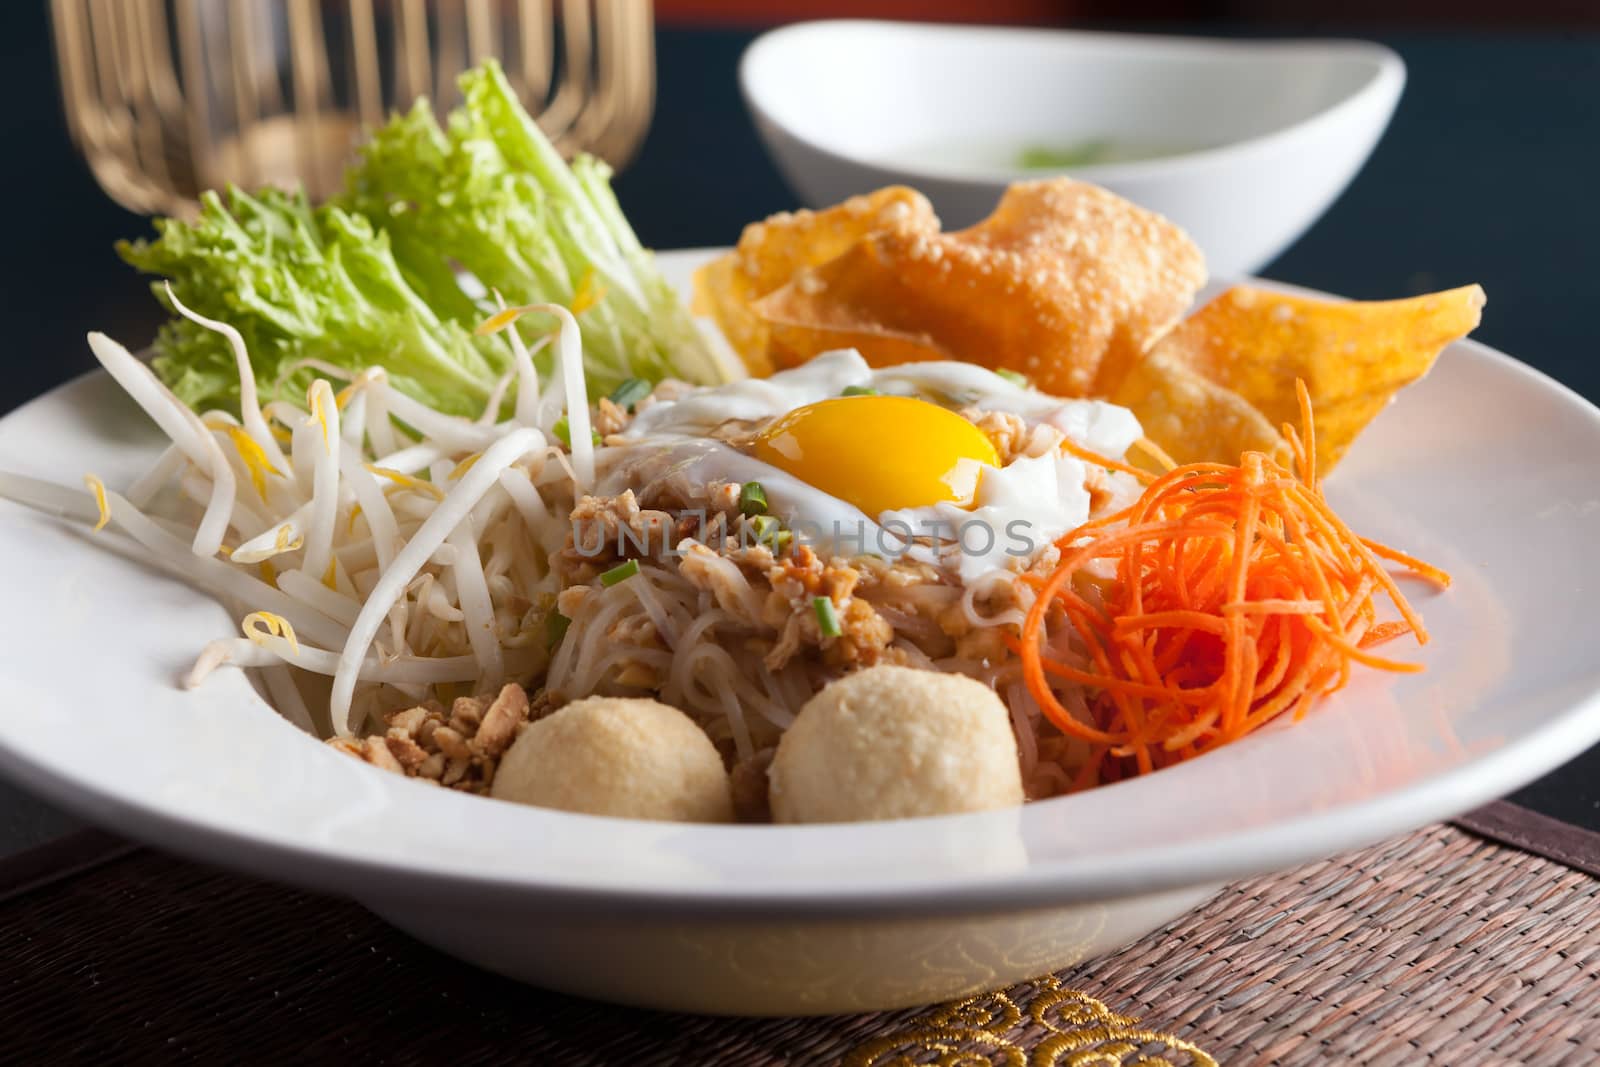 Thai Noodle Dish with Fried Egg by graficallyminded